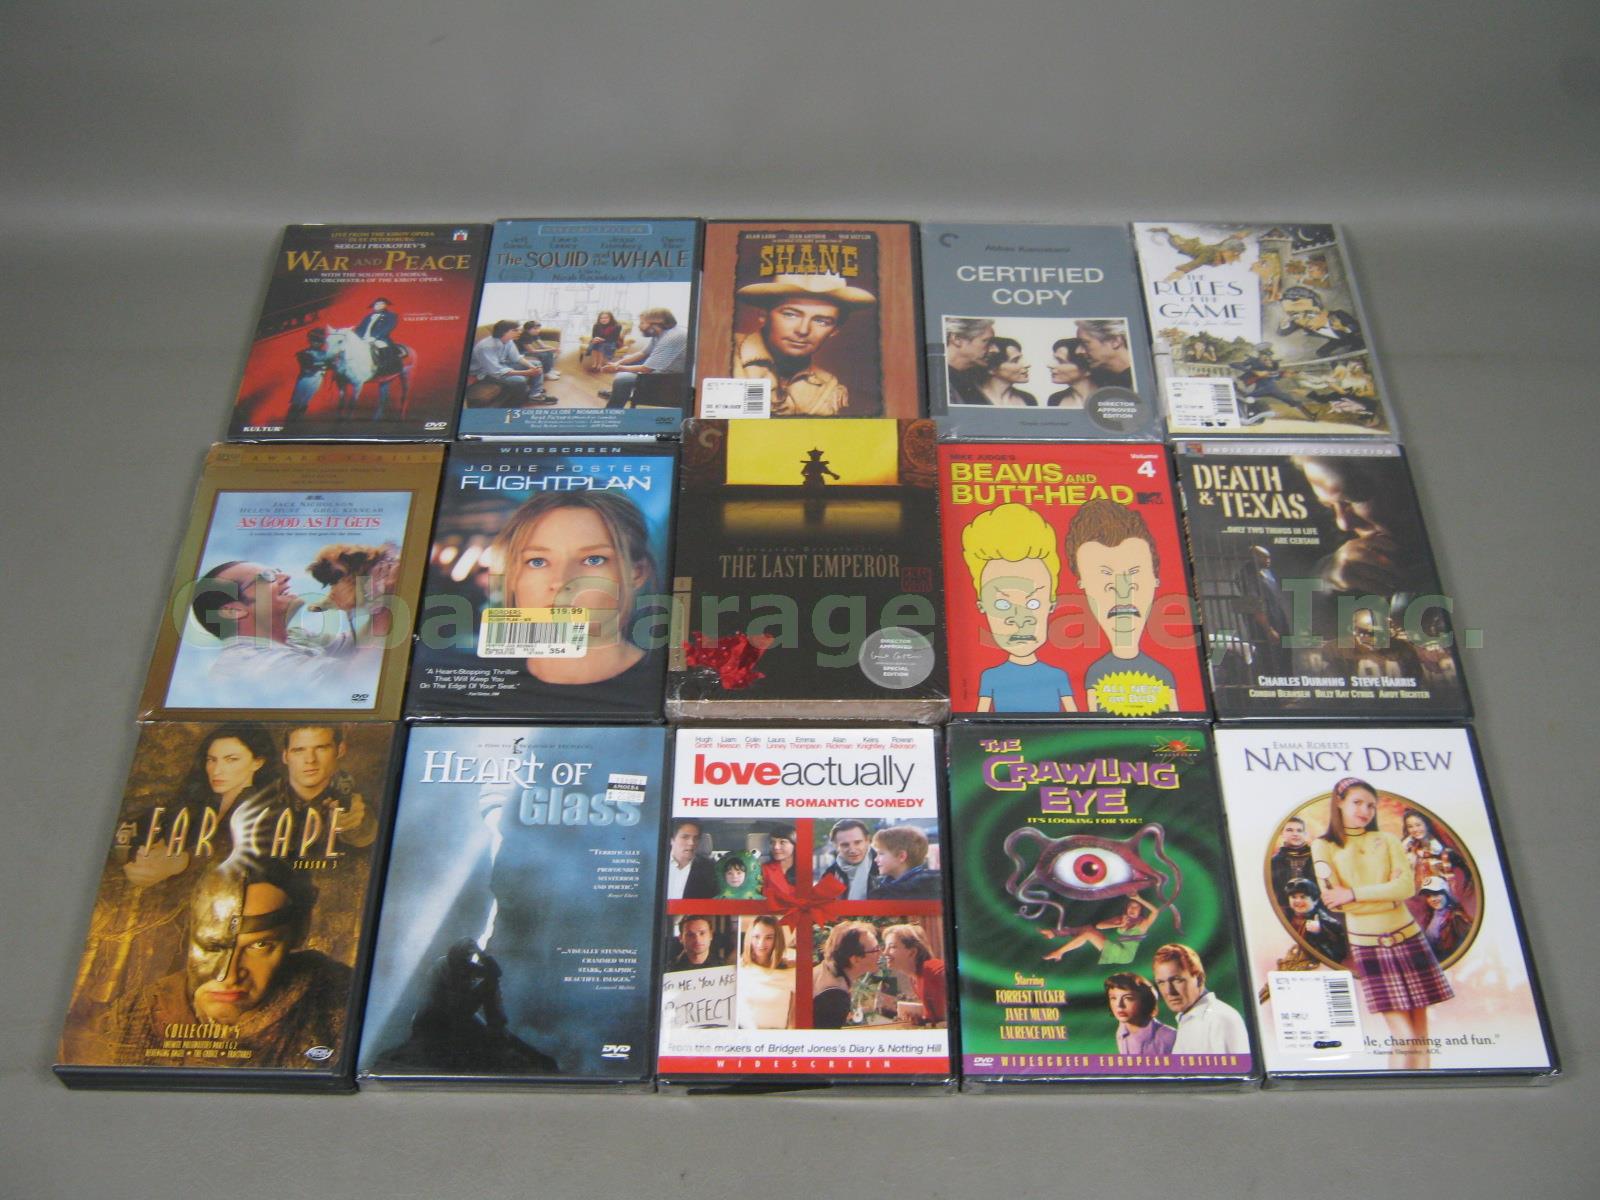 43 New Sealed DVD Movie Lot Action Comedy Drama Historical Horror Sci Fi Musical 2